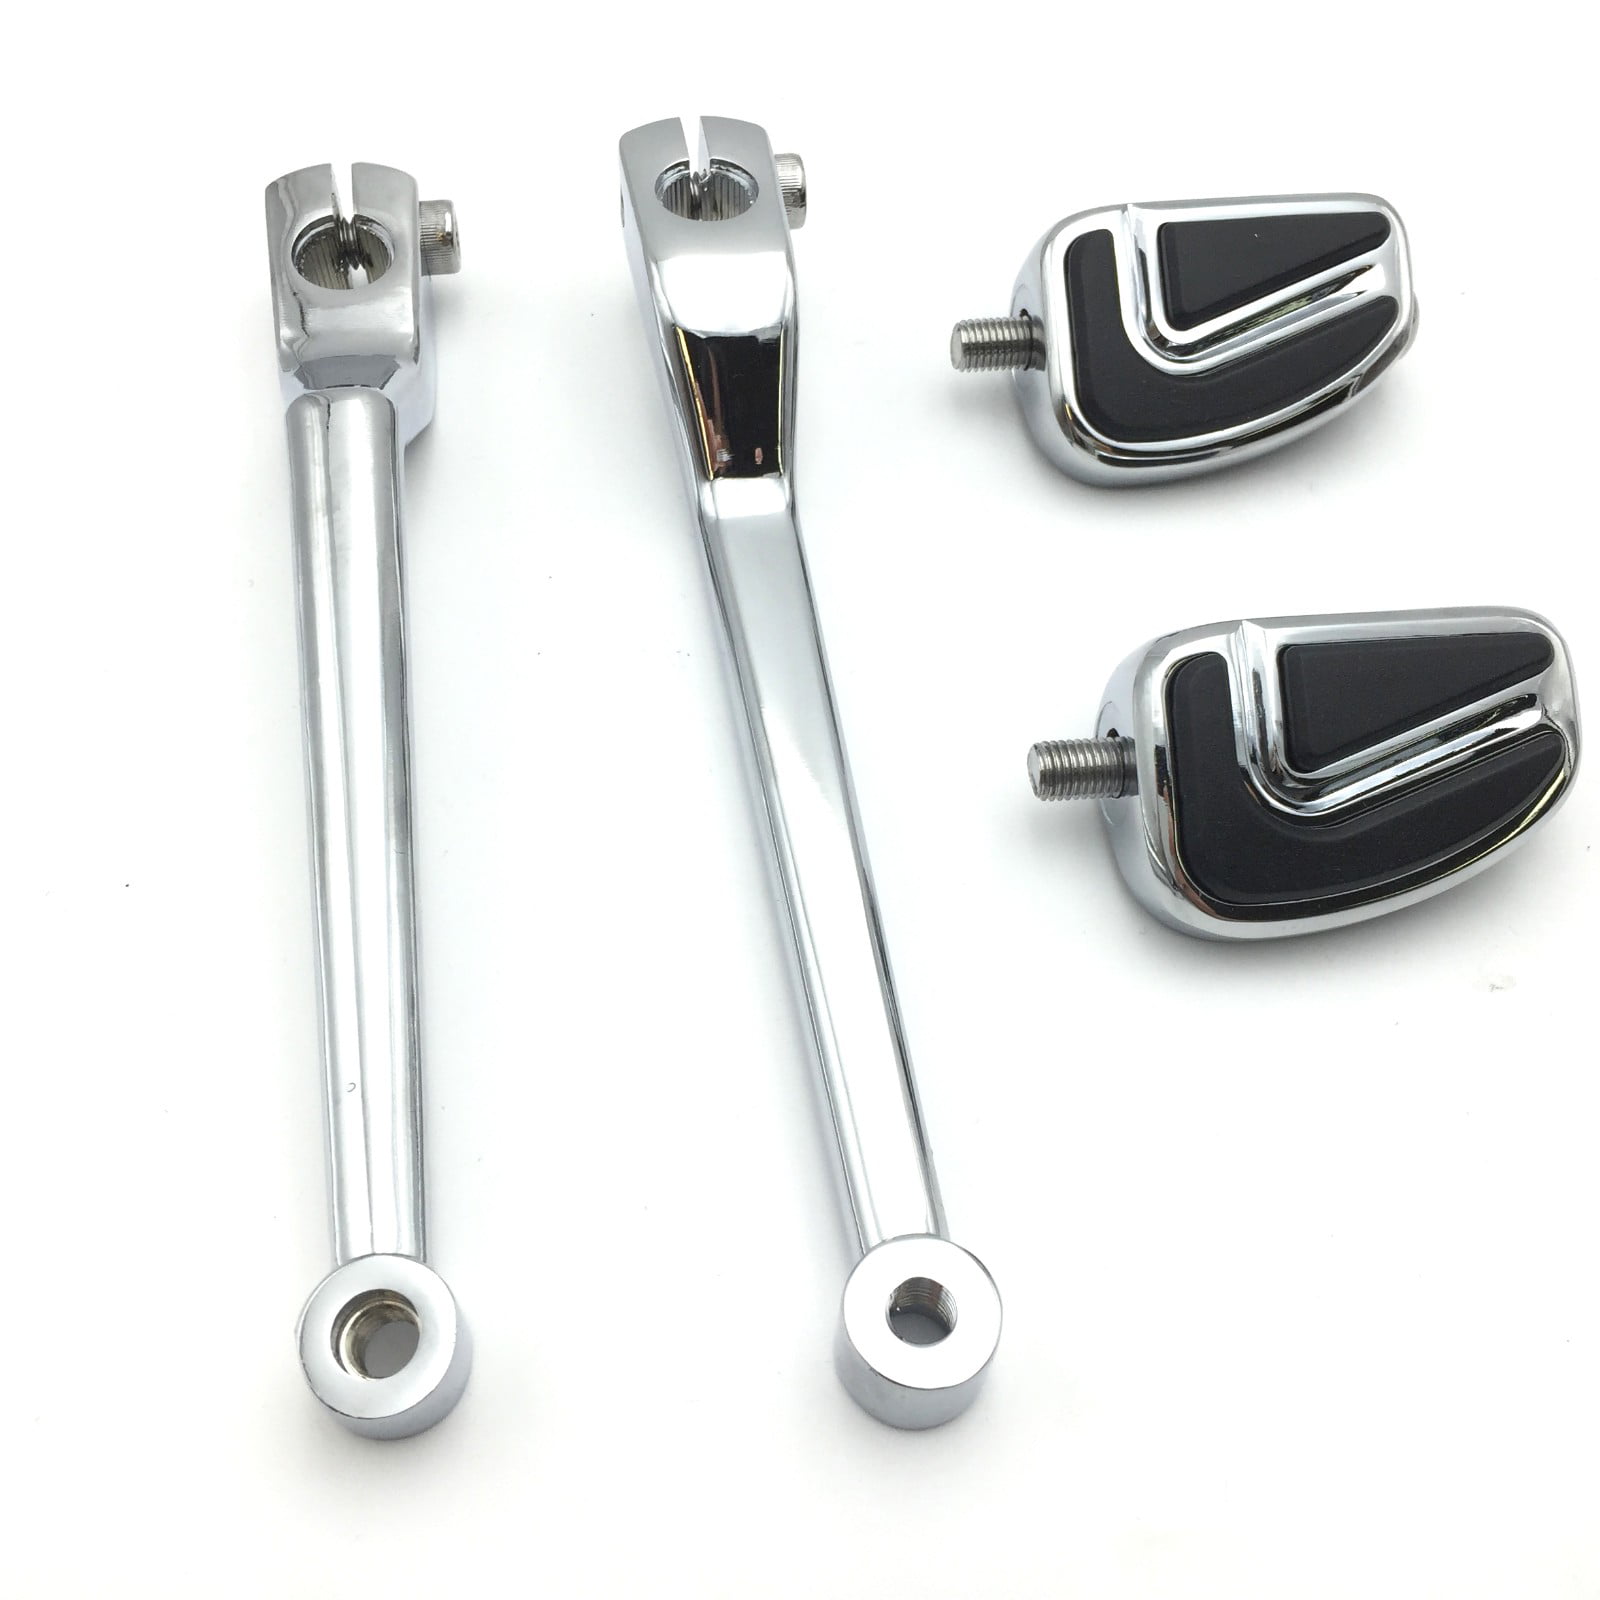 Heel Toe Shift Lever w/ Shifter Pegs For Harley Heritage Softail FLST 1986-later 